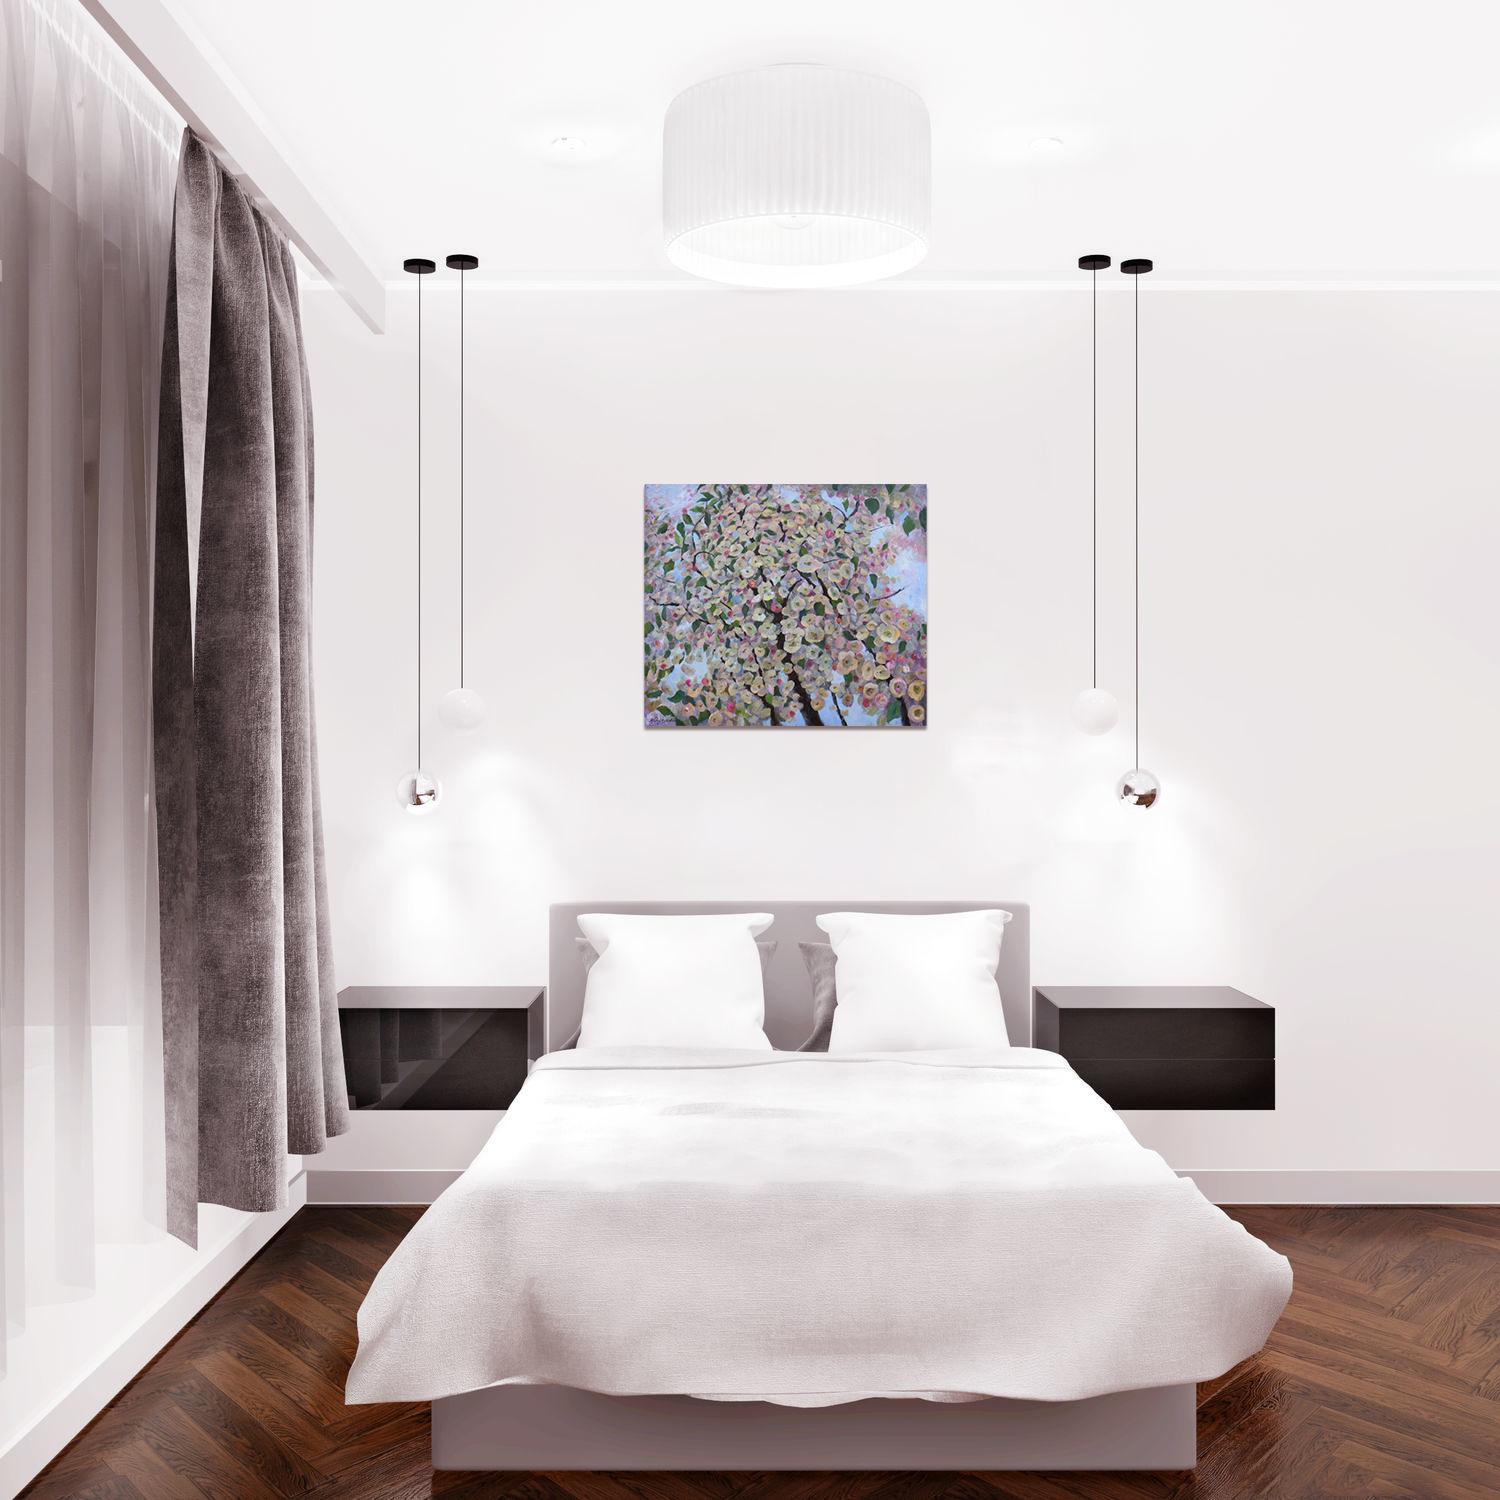 Oil painting with blooming tree is a great addition to your interior and will give you only pleasant emotions.
The flowering period is one of the most beautiful of the year. The blooming branch symbolizes solar energy as the source of life on Earth.